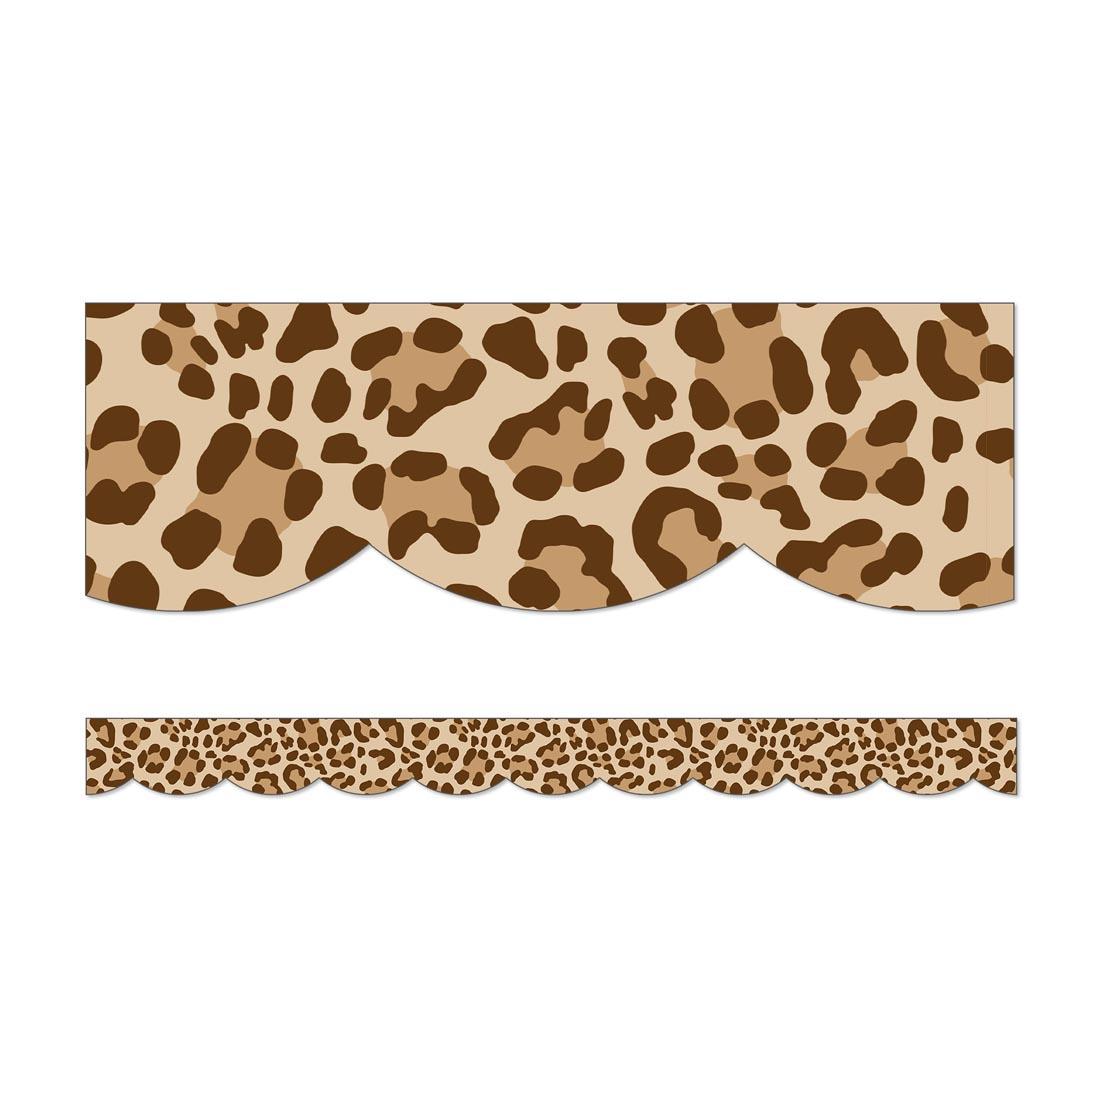 Close up of Simply Safari Leopard Scalloped Border By Carson Dellosa, featuring a leopard print, plus an example of a full strip